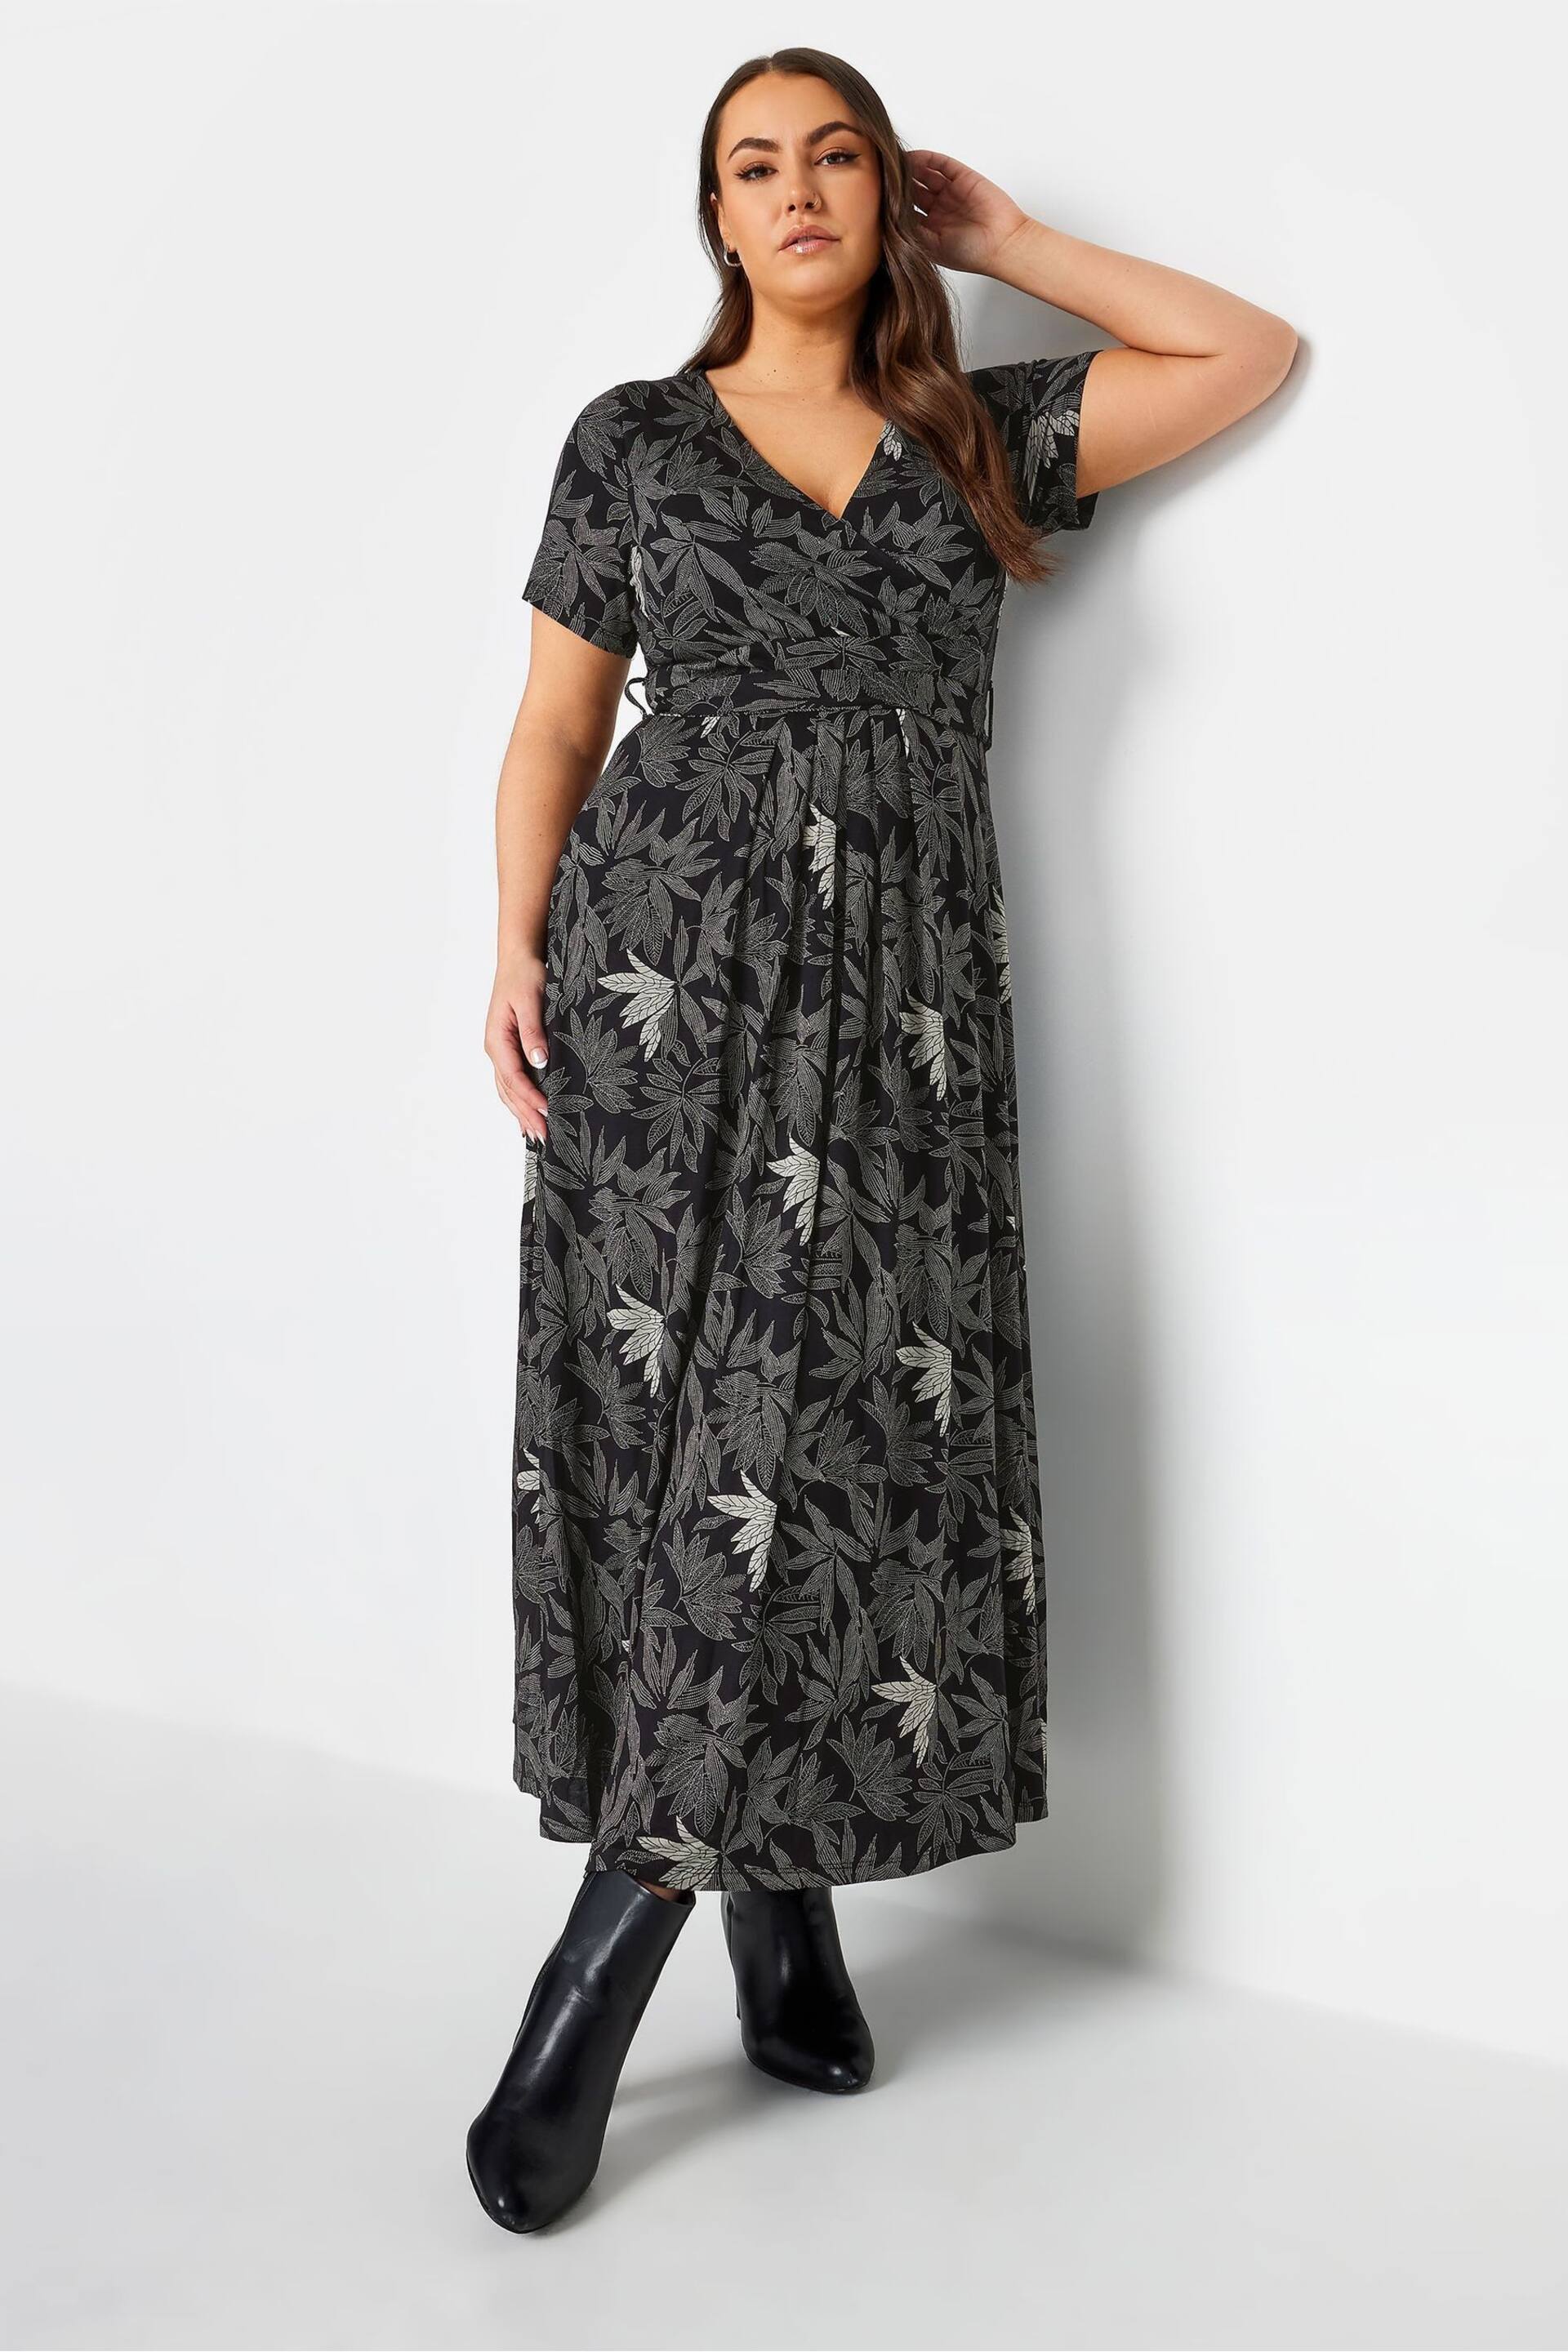 Yours Curve Black Grey Maxi Wrap Dress - Image 2 of 4